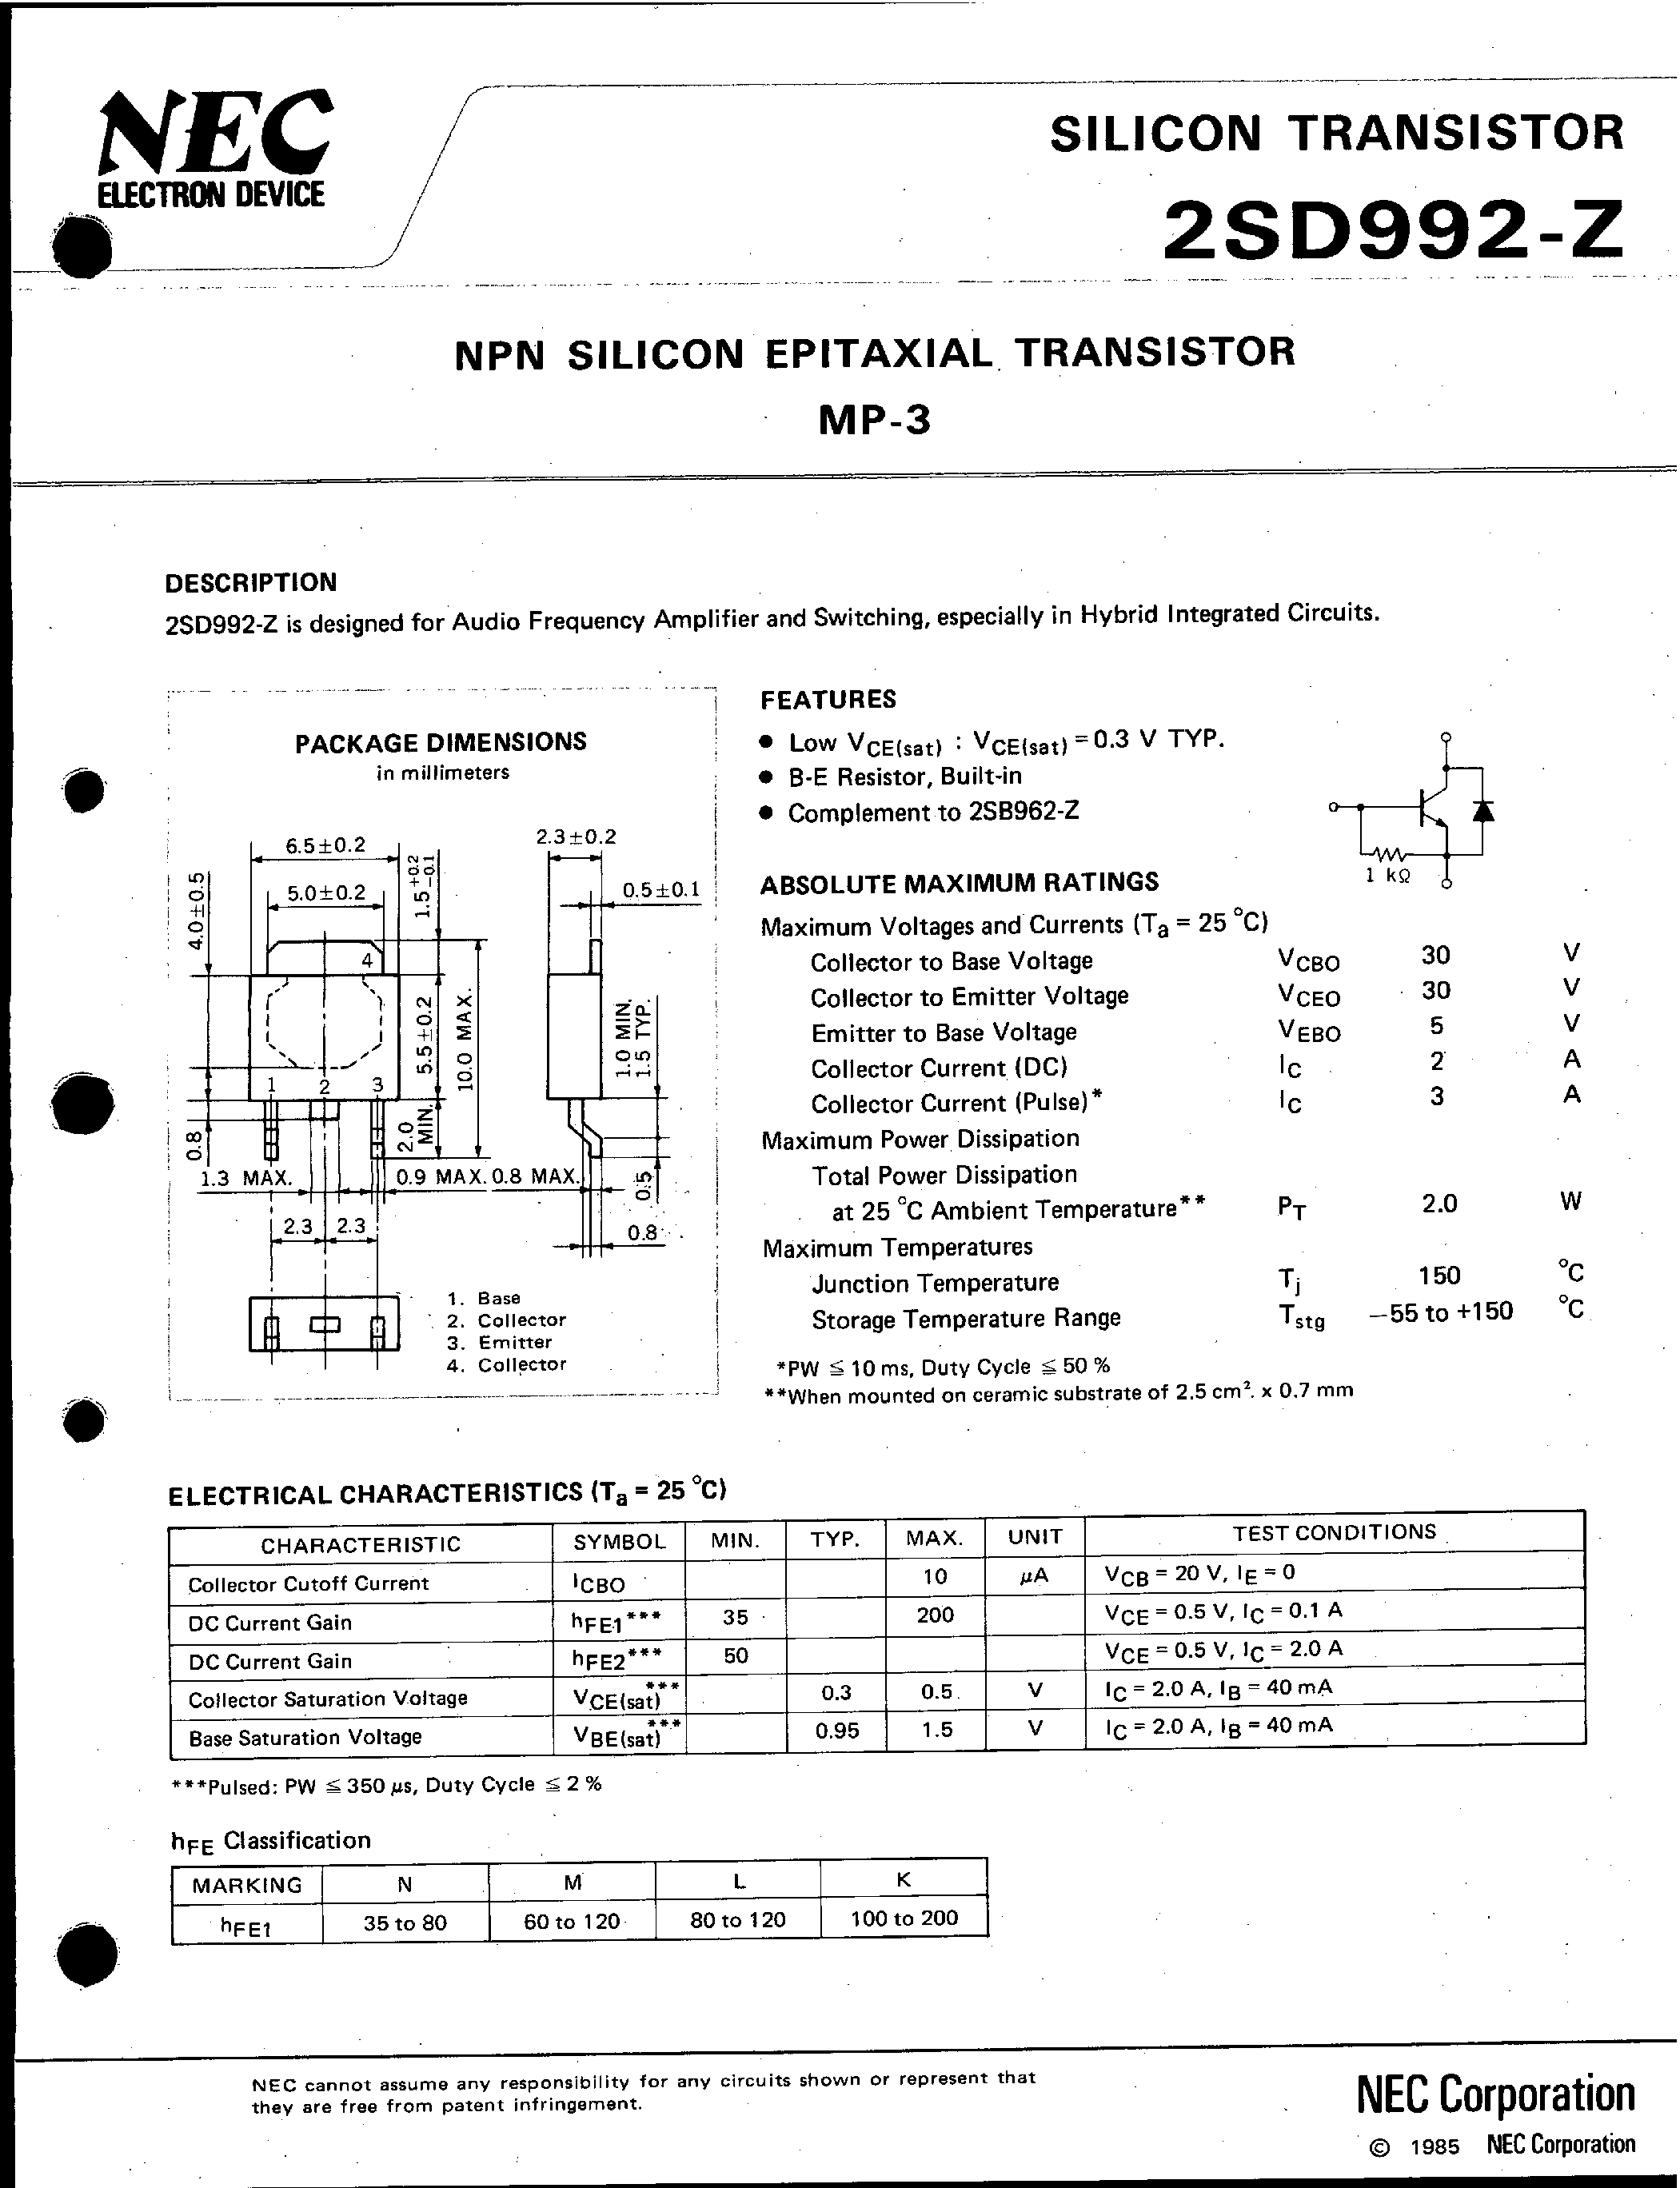 Даташит 2SD992-Z - NPN SILICON EPITAXIAL TRANSISTOR MP-3 страница 1